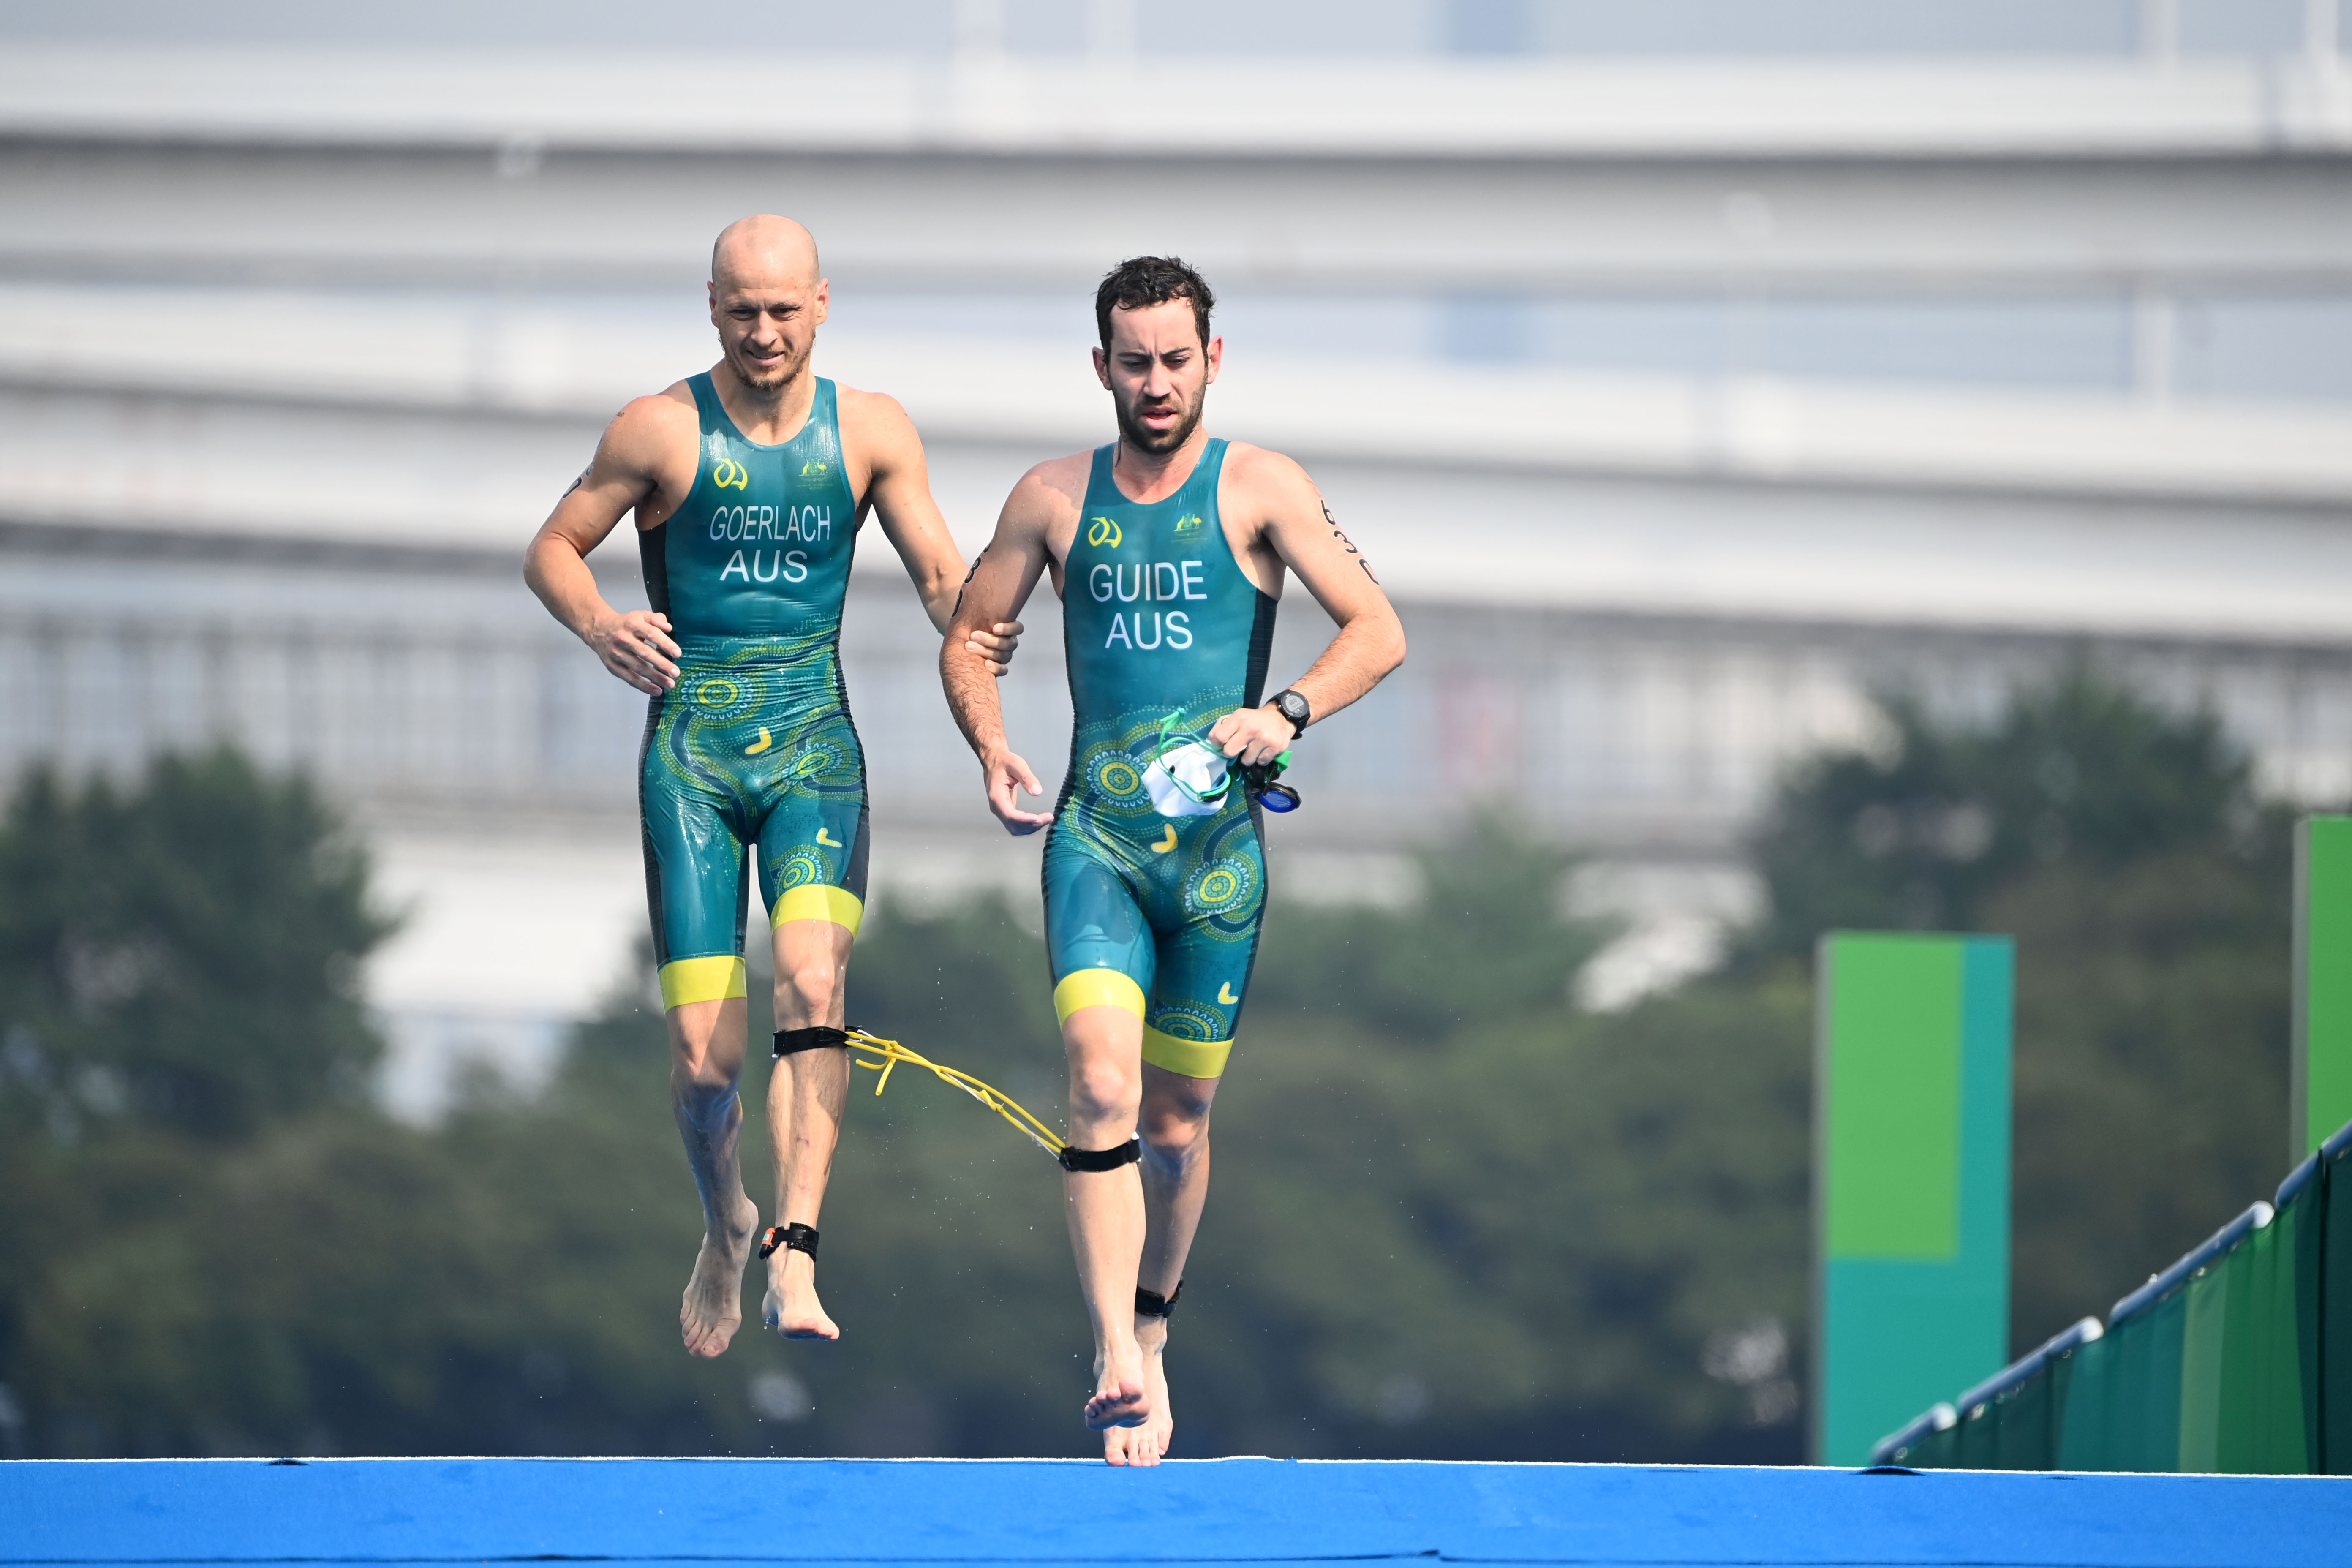 Jonathan Georlach competes in the Paratriathlon at Odiaba Bay, 2020 Tokyo Paralympic Game